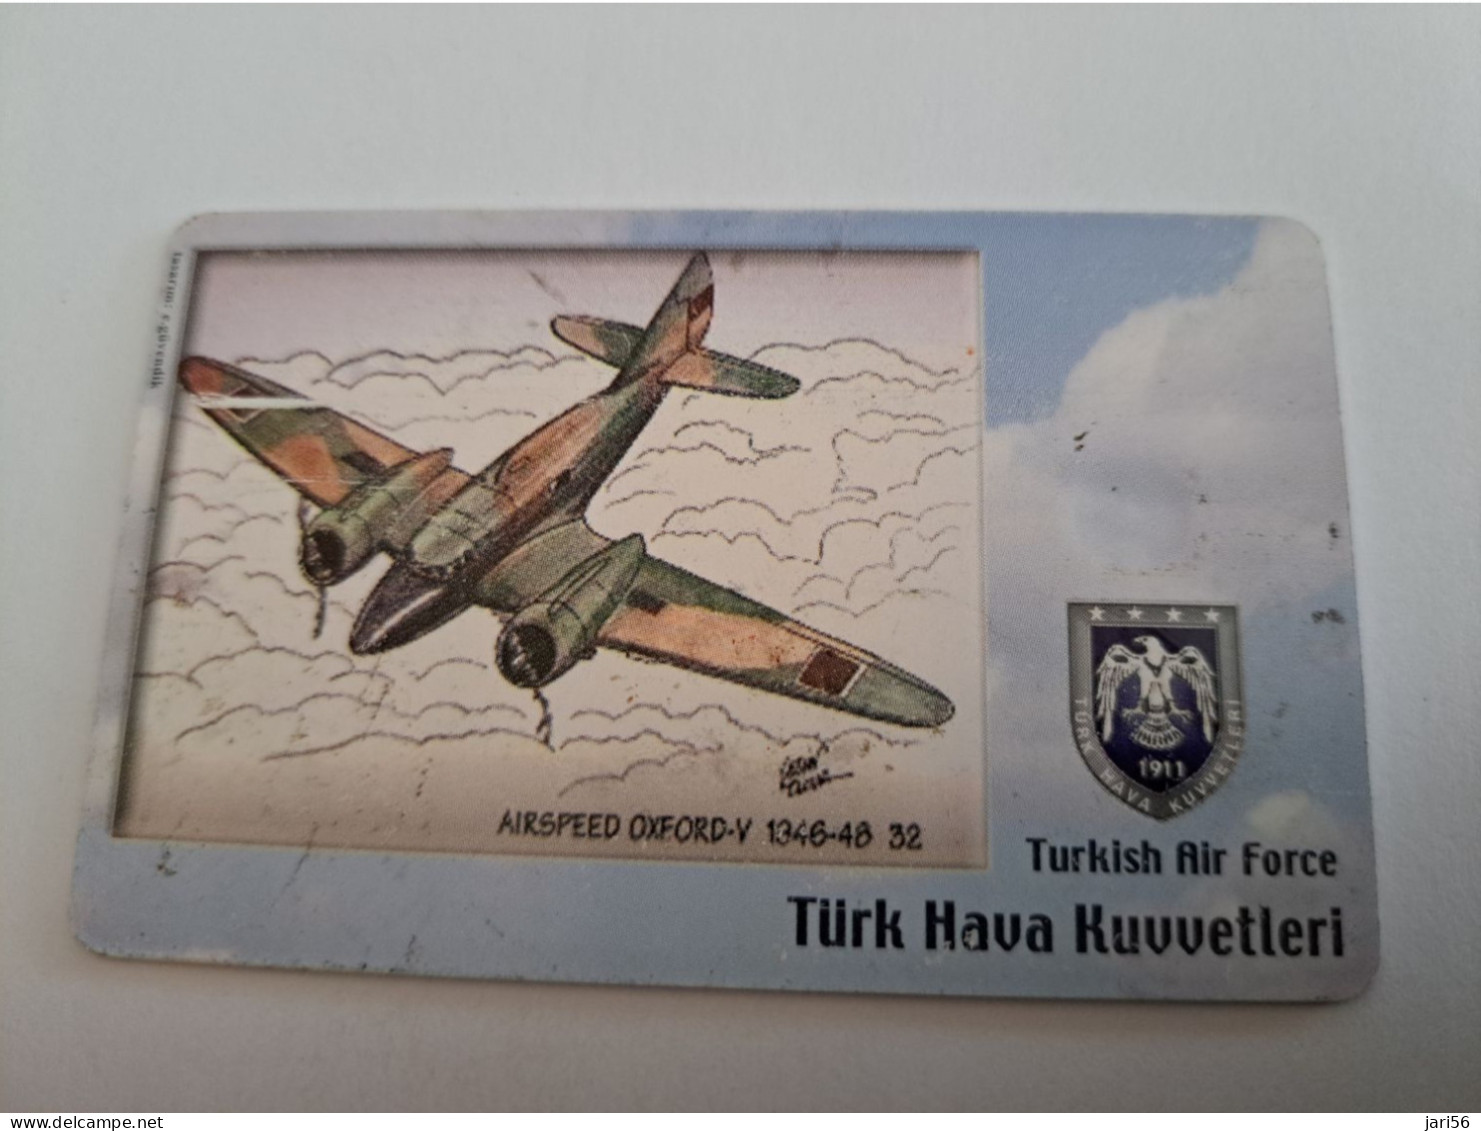 TURKIJE / 50 UNITS/ CHIPCARD/ TURKISH AIR FORCE  / DIFFERENT PLANES /        Fine Used Card  **15439** - Turquie